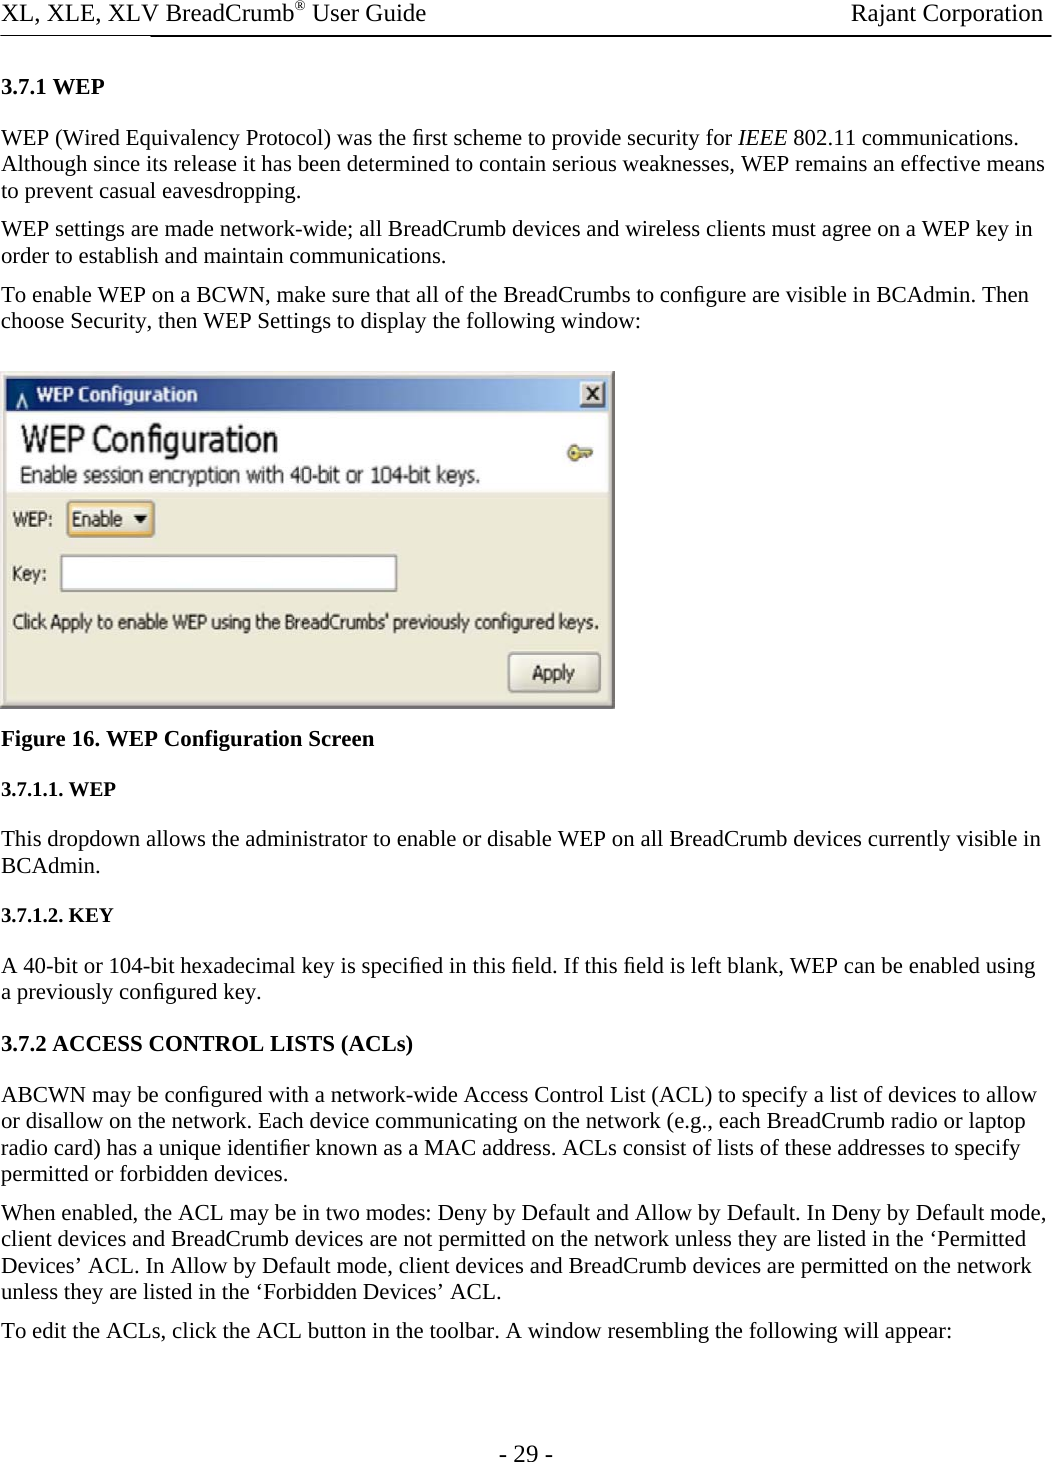 XL, XLE, XLV BreadCrumb® User Guide                Rajant Corporation 3.7.1 WEP  WEP (Wired Equivalency Protocol) was the ﬁrst scheme to provide security for IEEE 802.11 communications. Although since its release it has been determined to contain serious weaknesses, WEP remains an effective means to prevent casual eavesdropping.  WEP settings are made network-wide; all BreadCrumb devices and wireless clients must agree on a WEP key in order to establish and maintain communications.  To enable WEP on a BCWN, make sure that all of the BreadCrumbs to conﬁgure are visible in BCAdmin. Then choose Security, then WEP Settings to display the following window:   Figure 16. WEP Configuration Screen 3.7.1.1. WEP  This dropdown allows the administrator to enable or disable WEP on all BreadCrumb devices currently visible in BCAdmin.  3.7.1.2. KEY  A 40-bit or 104-bit hexadecimal key is speciﬁed in this ﬁeld. If this ﬁeld is left blank, WEP can be enabled using a previously conﬁgured key. 3.7.2 ACCESS CONTROL LISTS (ACLs)  ABCWN may be conﬁgured with a network-wide Access Control List (ACL) to specify a list of devices to allow or disallow on the network. Each device communicating on the network (e.g., each BreadCrumb radio or laptop radio card) has a unique identiﬁer known as a MAC address. ACLs consist of lists of these addresses to specify permitted or forbidden devices.  When enabled, the ACL may be in two modes: Deny by Default and Allow by Default. In Deny by Default mode, client devices and BreadCrumb devices are not permitted on the network unless they are listed in the ‘Permitted Devices’ ACL. In Allow by Default mode, client devices and BreadCrumb devices are permitted on the network unless they are listed in the ‘Forbidden Devices’ ACL.  To edit the ACLs, click the ACL button in the toolbar. A window resembling the following will appear:  - 29 - 